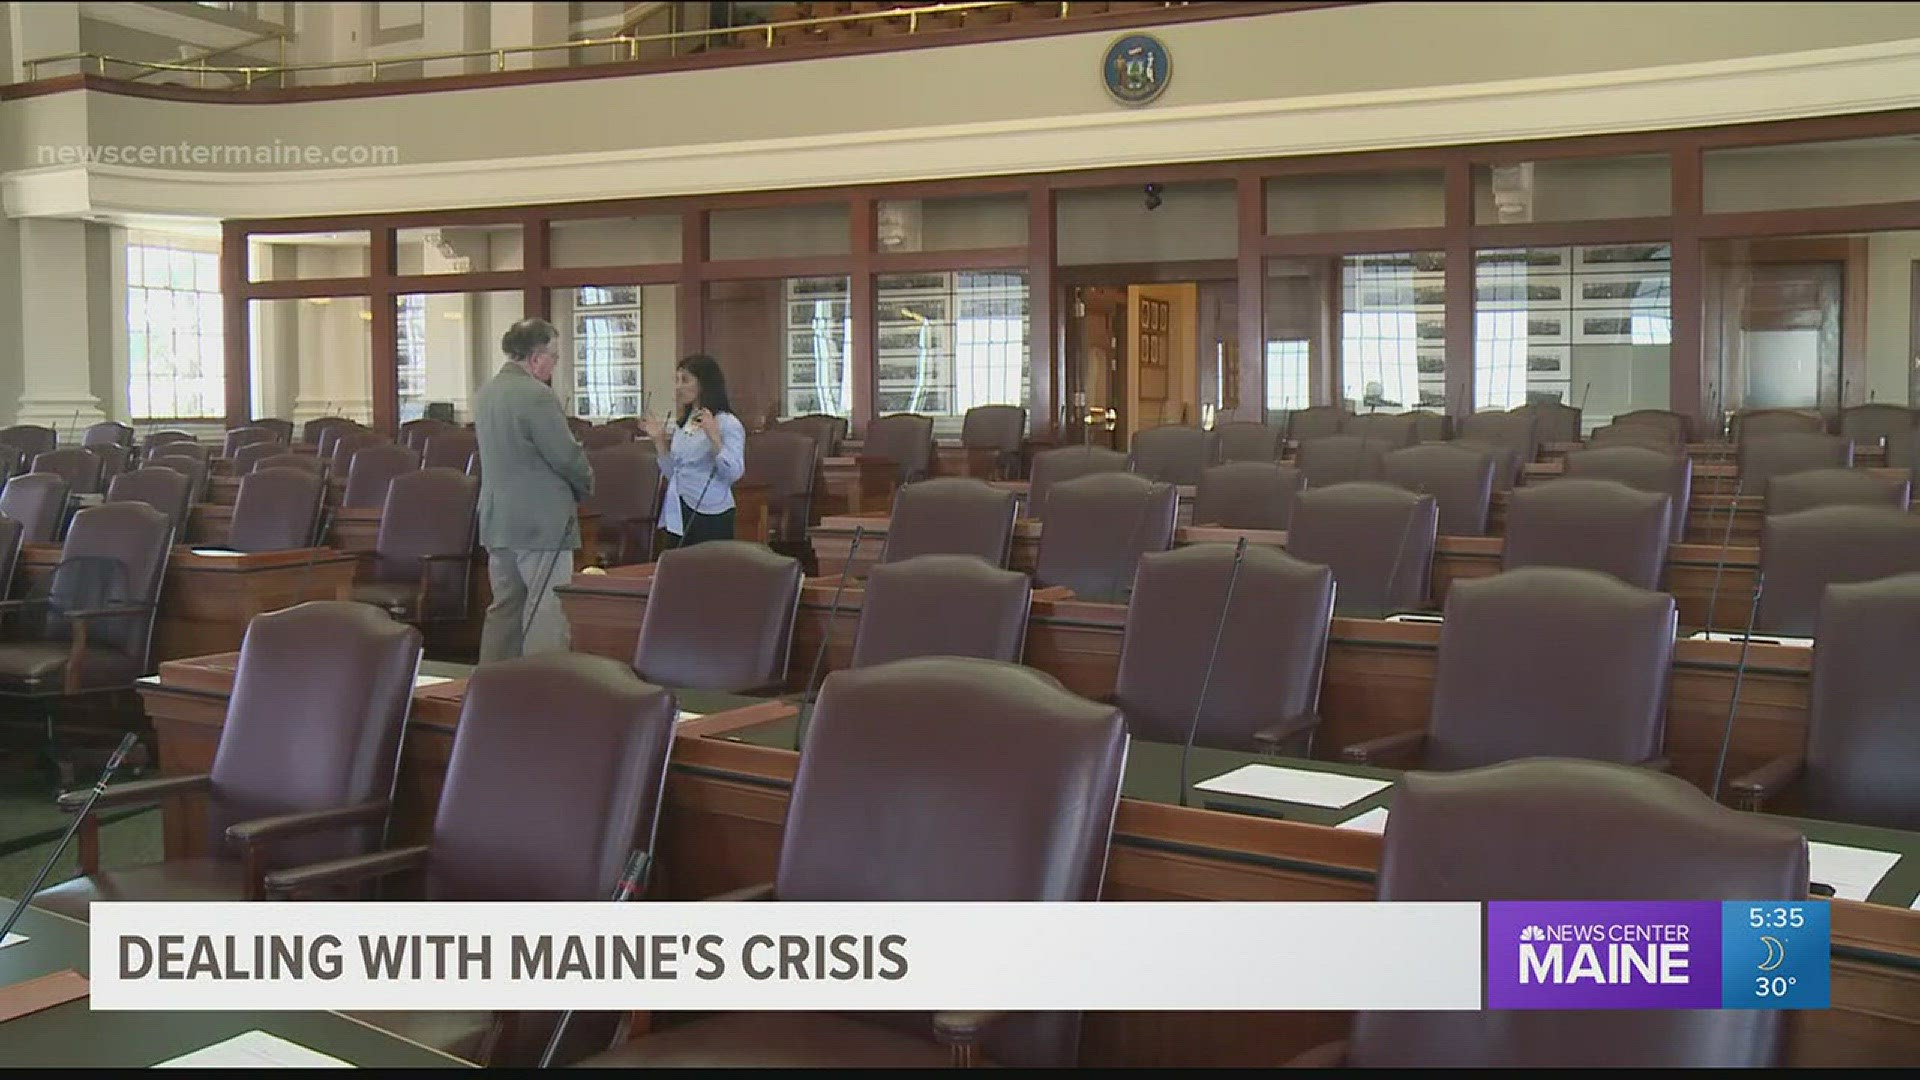 Dealing with Maine's crisis